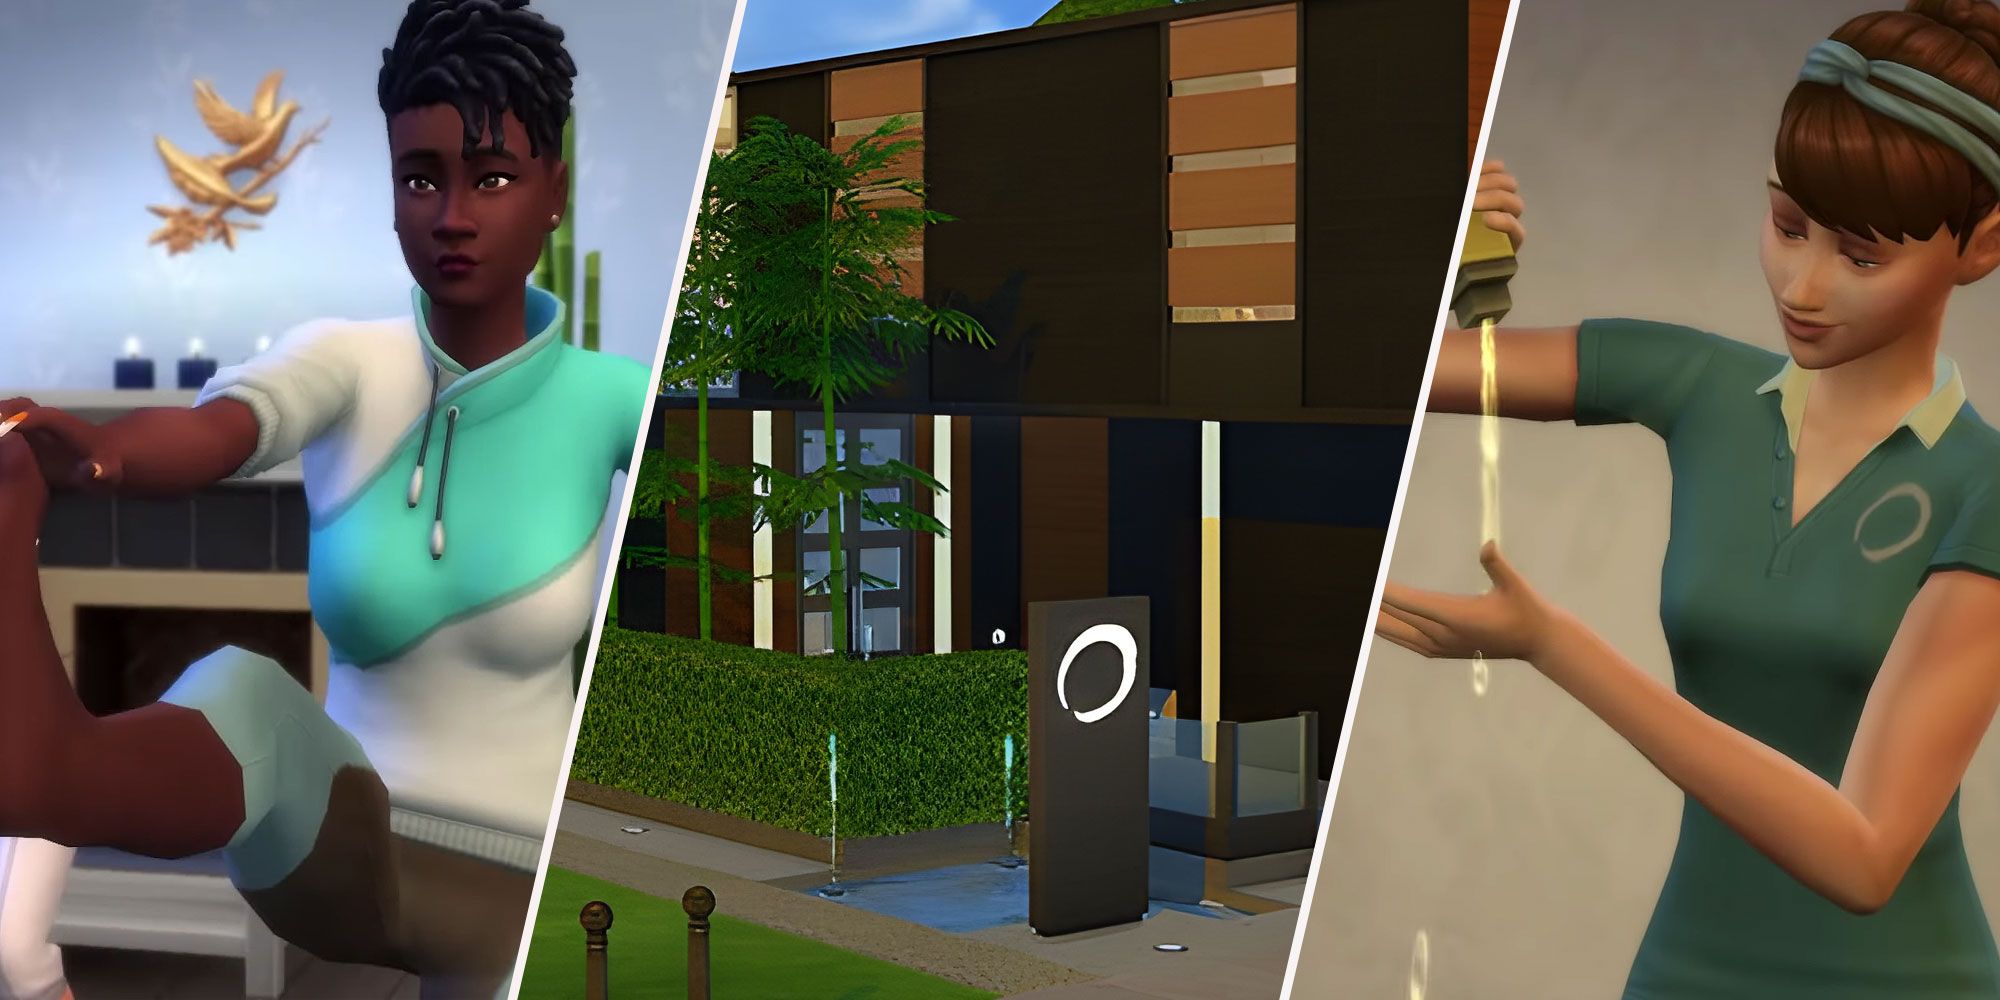 How To Find The Spa In The Sims 4